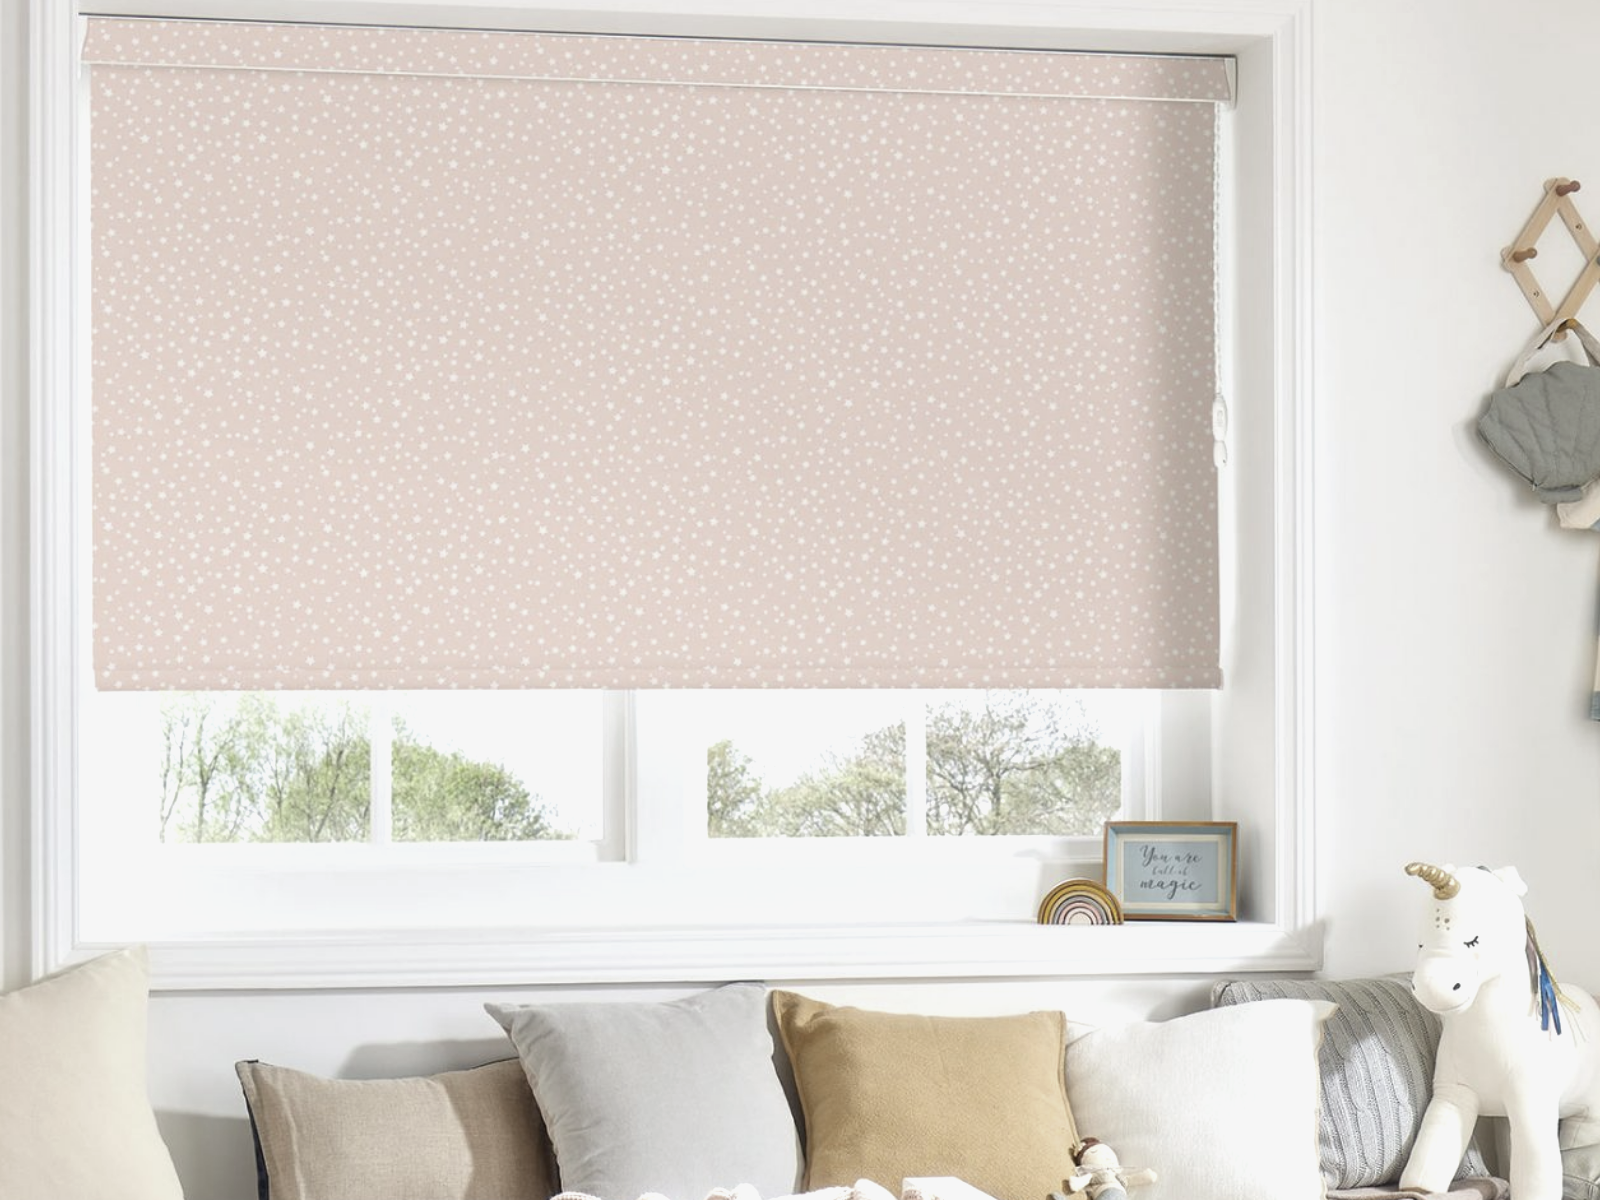 Sunshine Blinds stock child safe blinds ideal for family homes throughout Oldham, rochdale and the North West.